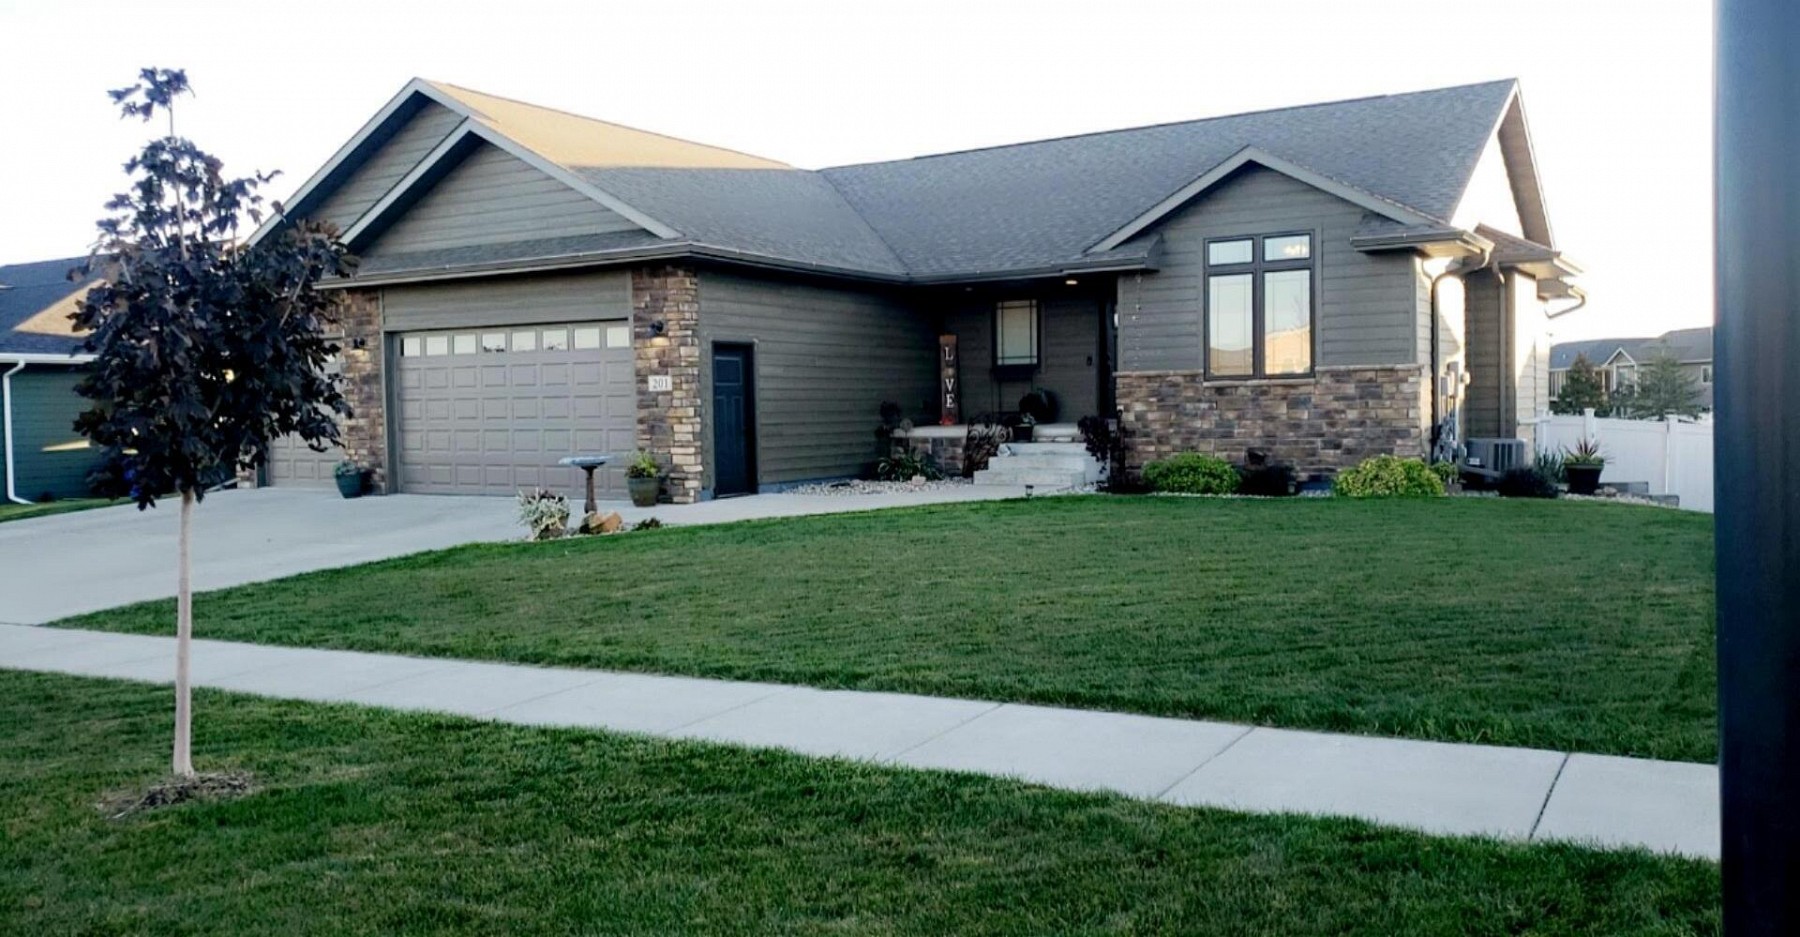 201 Blue Bell Drive, Brookings, SD 57006